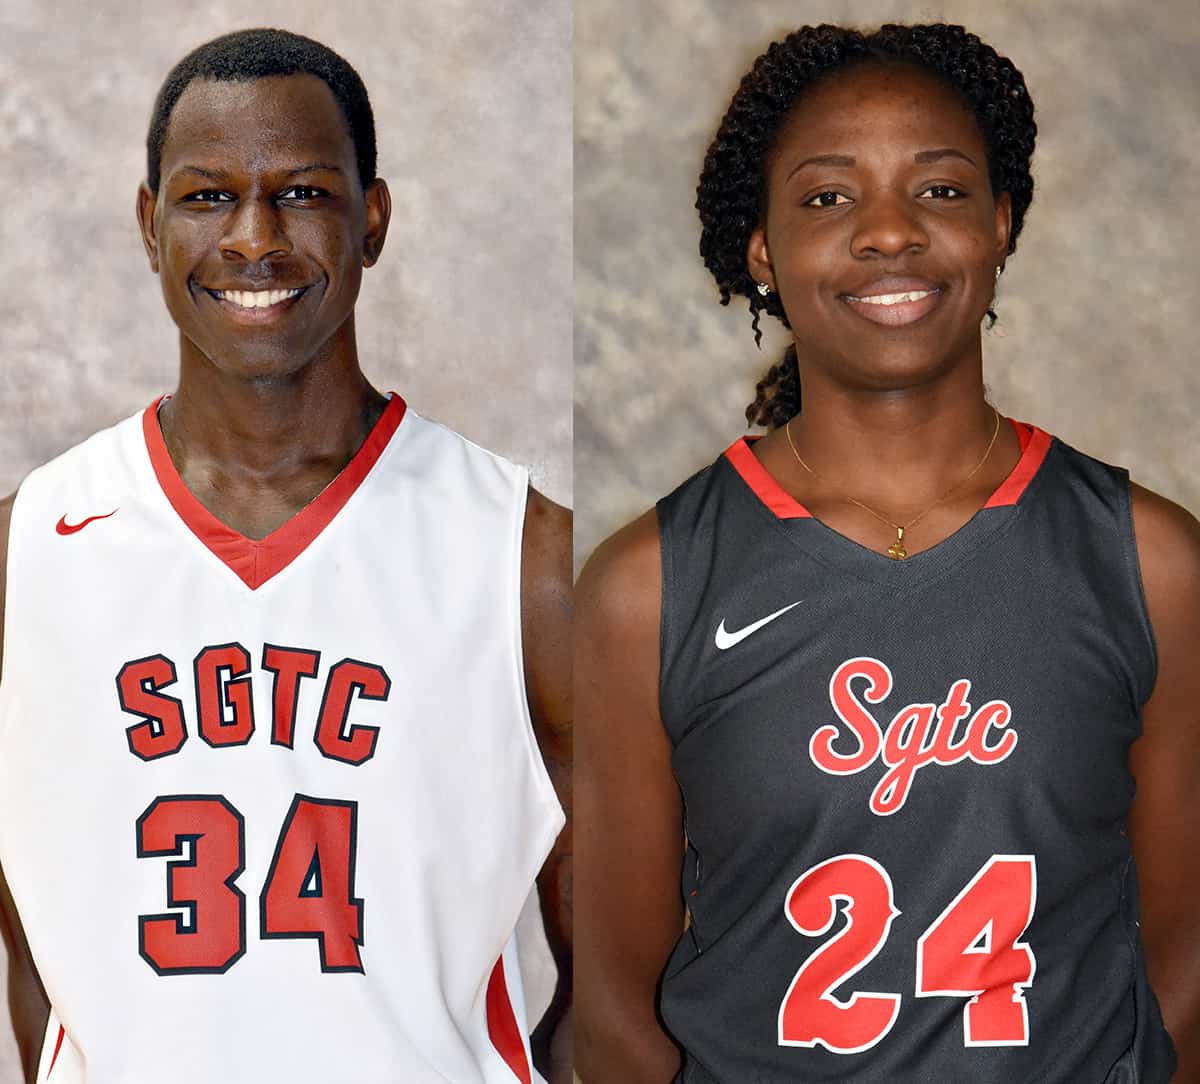 South Georgia Technical College’s Marquel Wiggins (34) and Esther Adenike (24) were selected as the GCAA Division I men’s and women’s basketball Players of the Week recently.